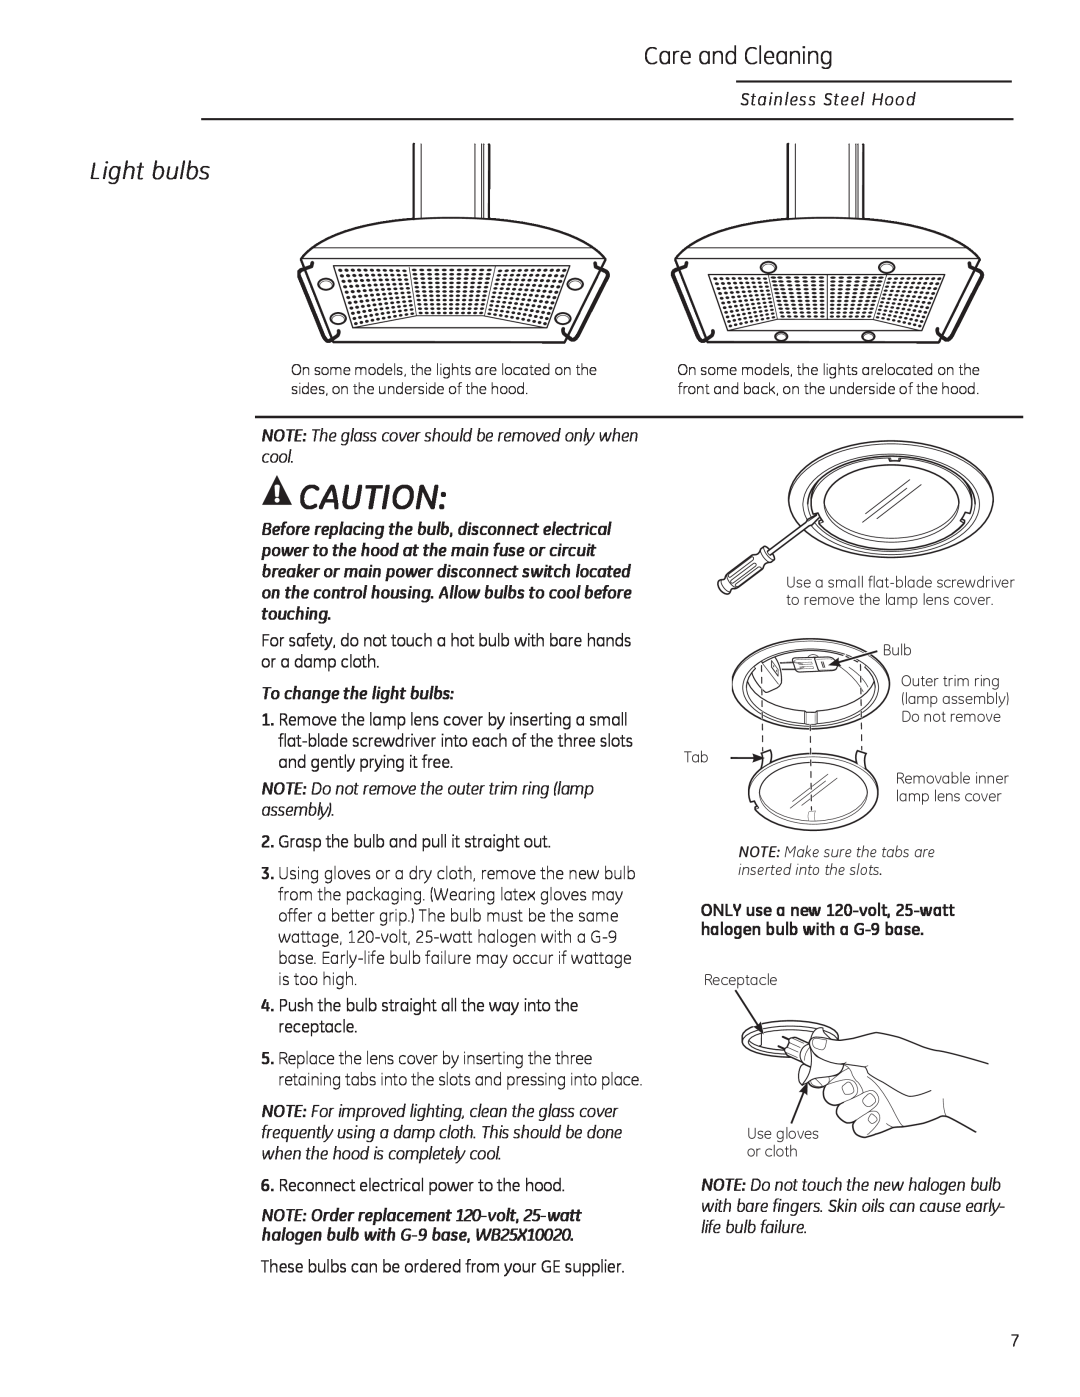 GE ZV950, ZV1050 owner manual Light bulbs, Care and Cleaning, To change the light bulbs 